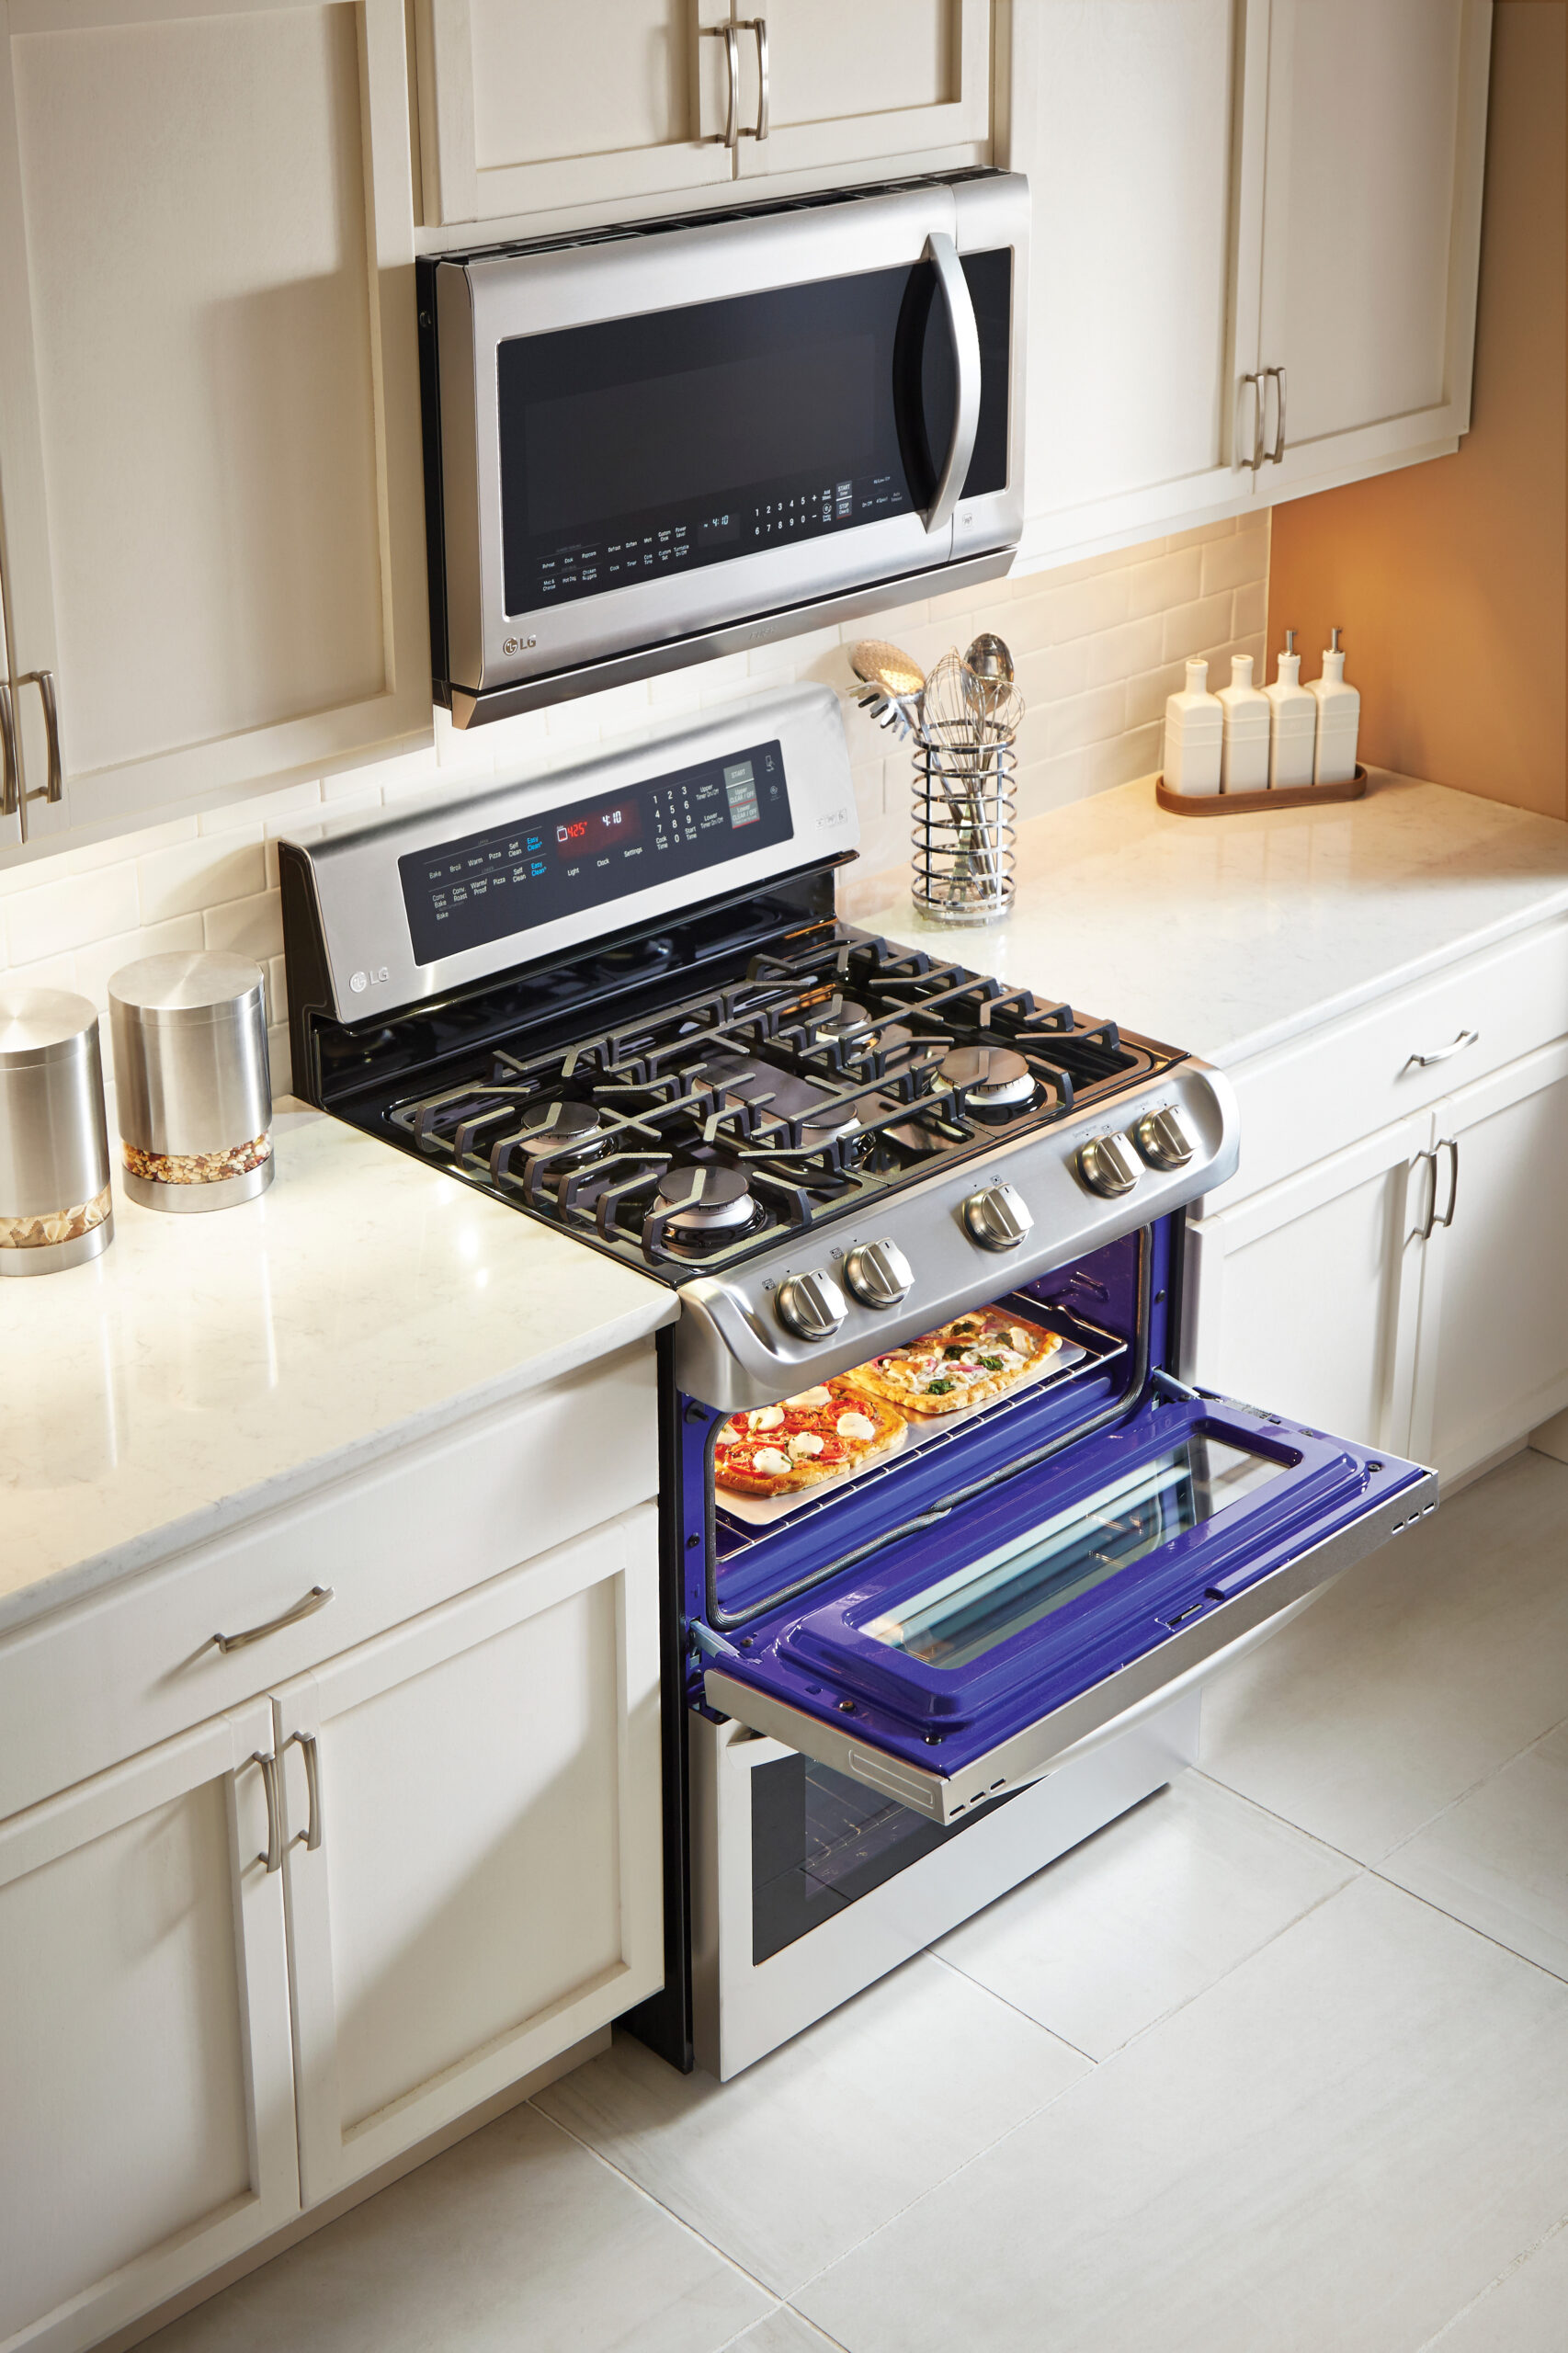 Step Up Your Baking Game With The LG ProBake Double Oven From BestBuy